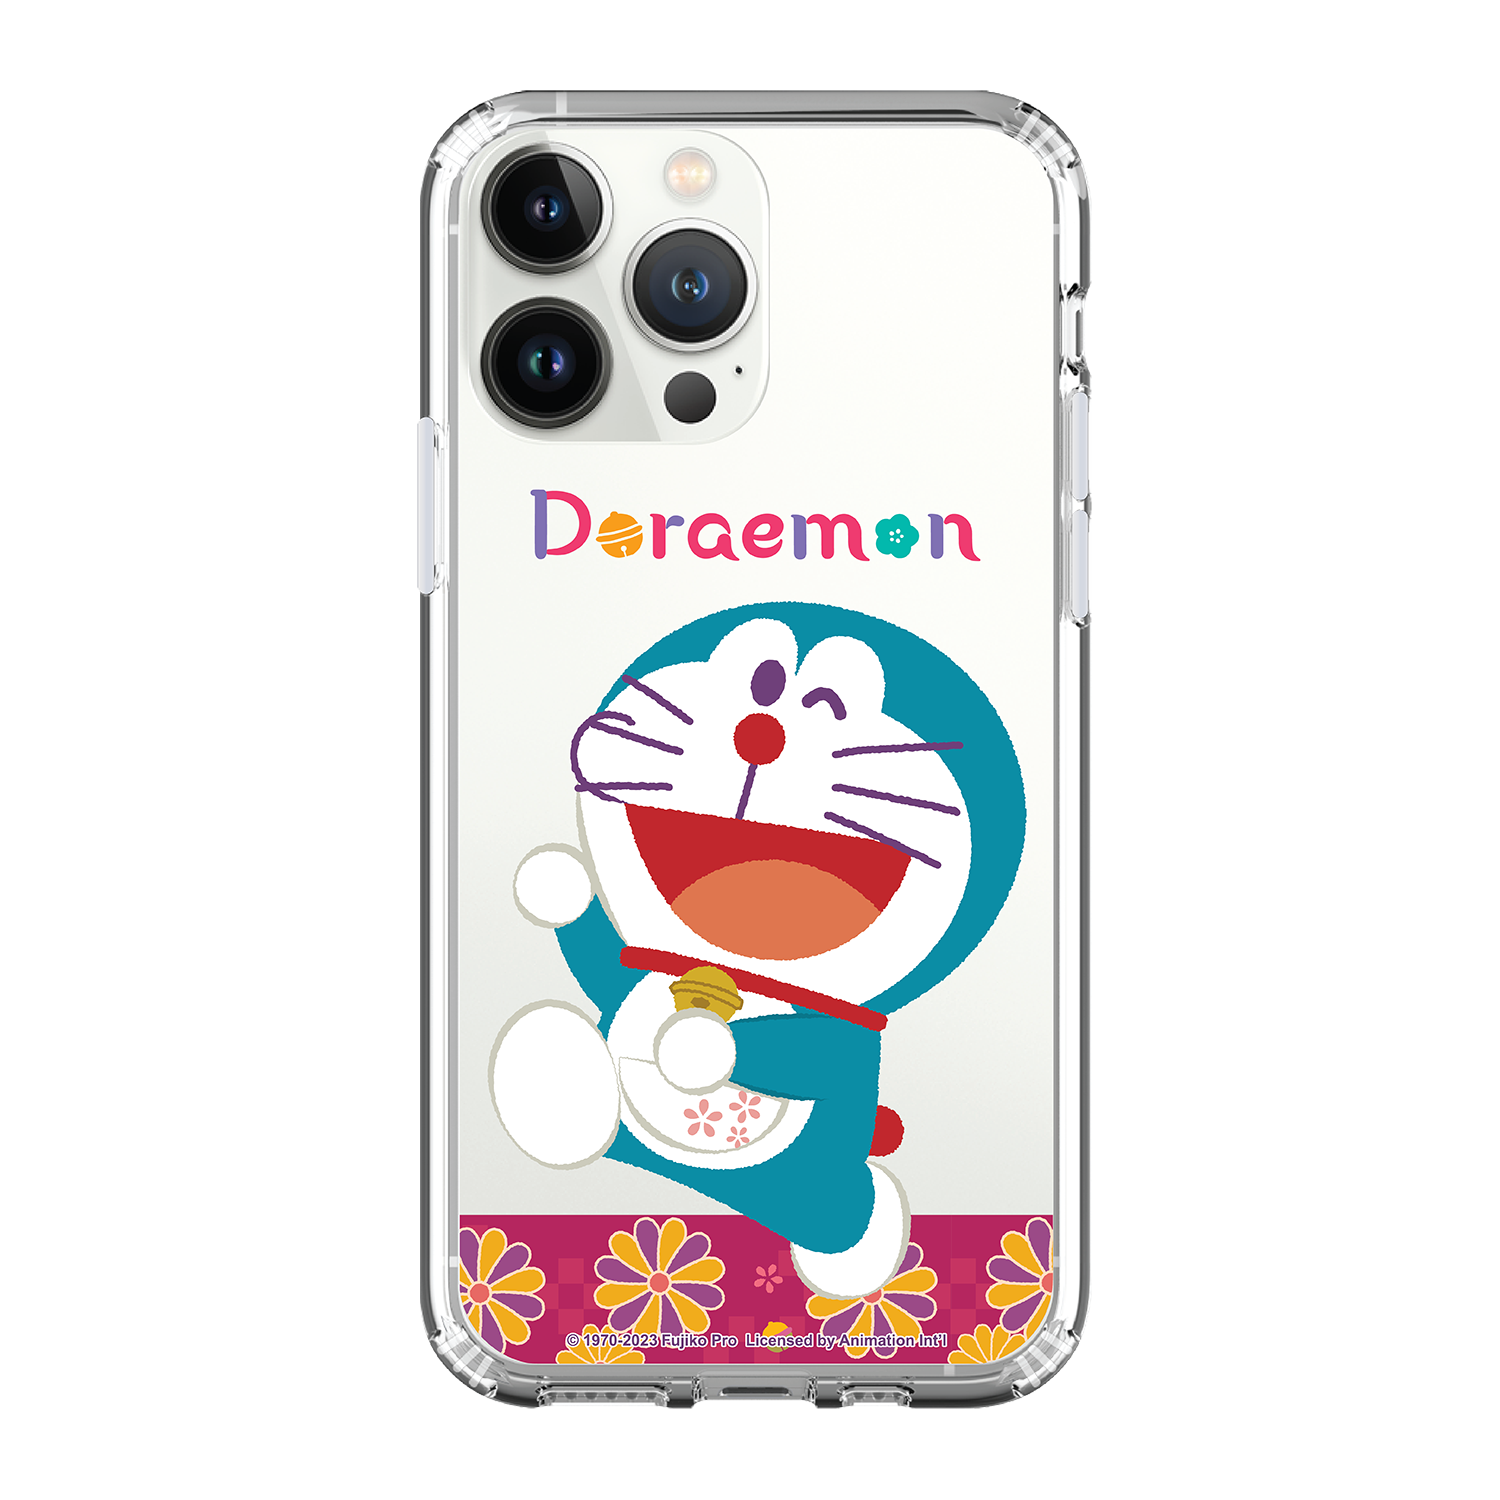 Doraemon Clear Case / iPhone Case / Android Case / Samsung Case 多啦A夢 正版授權 全包邊氣囊防撞手機殼 (DO125)